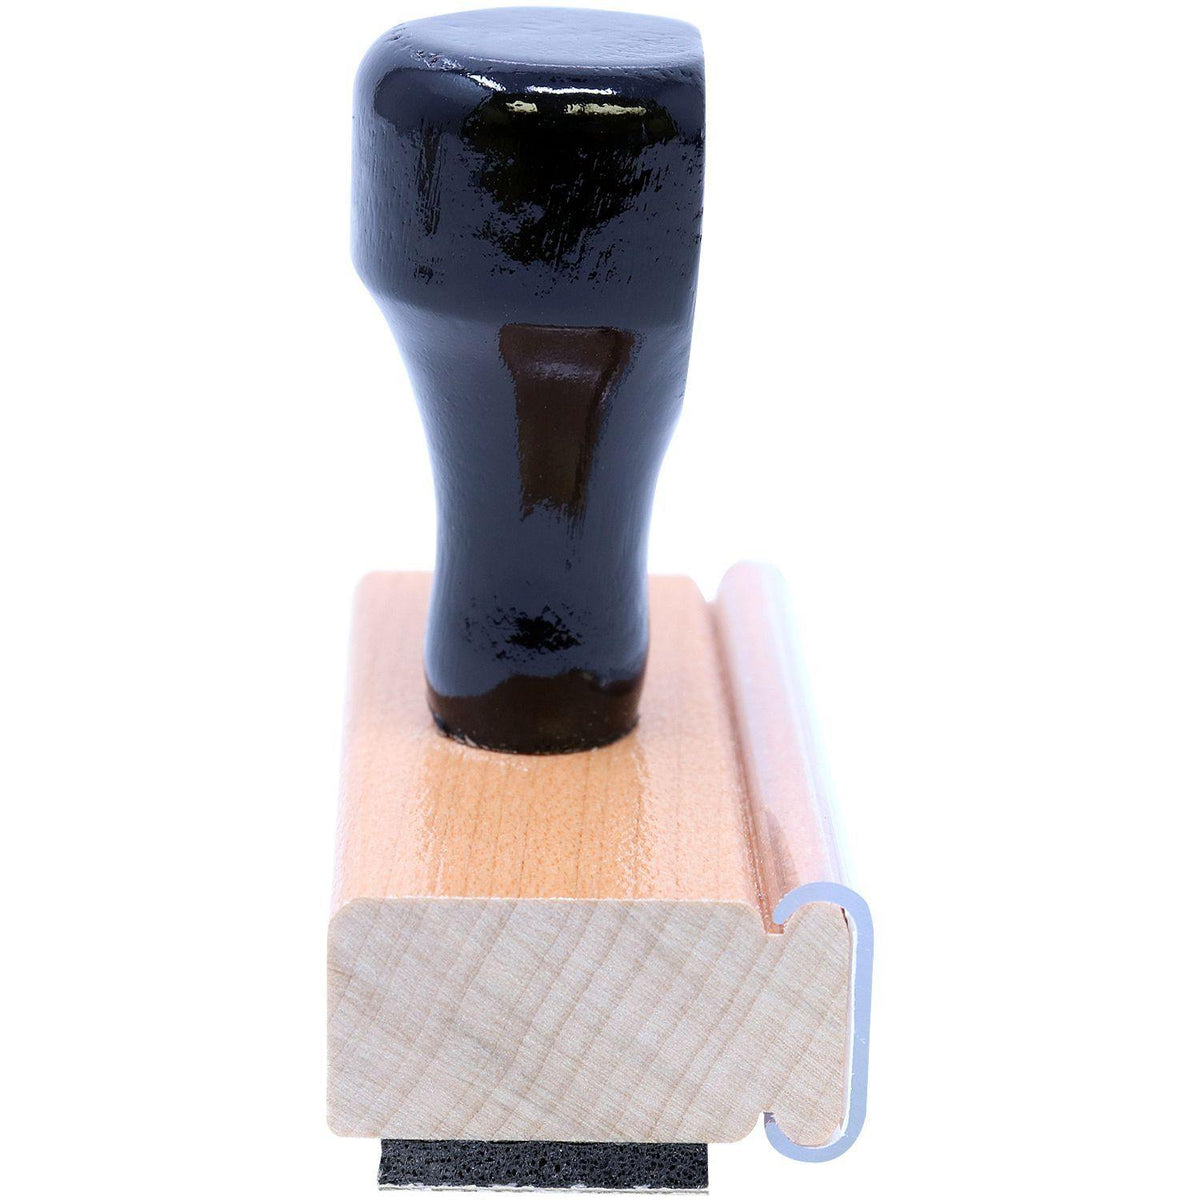 Memo Billed Rubber Stamp - Engineer Seal Stamps - Brand_Acorn, Impression Size_Small, Stamp Type_Regular Stamp, Type of Use_Business, Type of Use_Finance